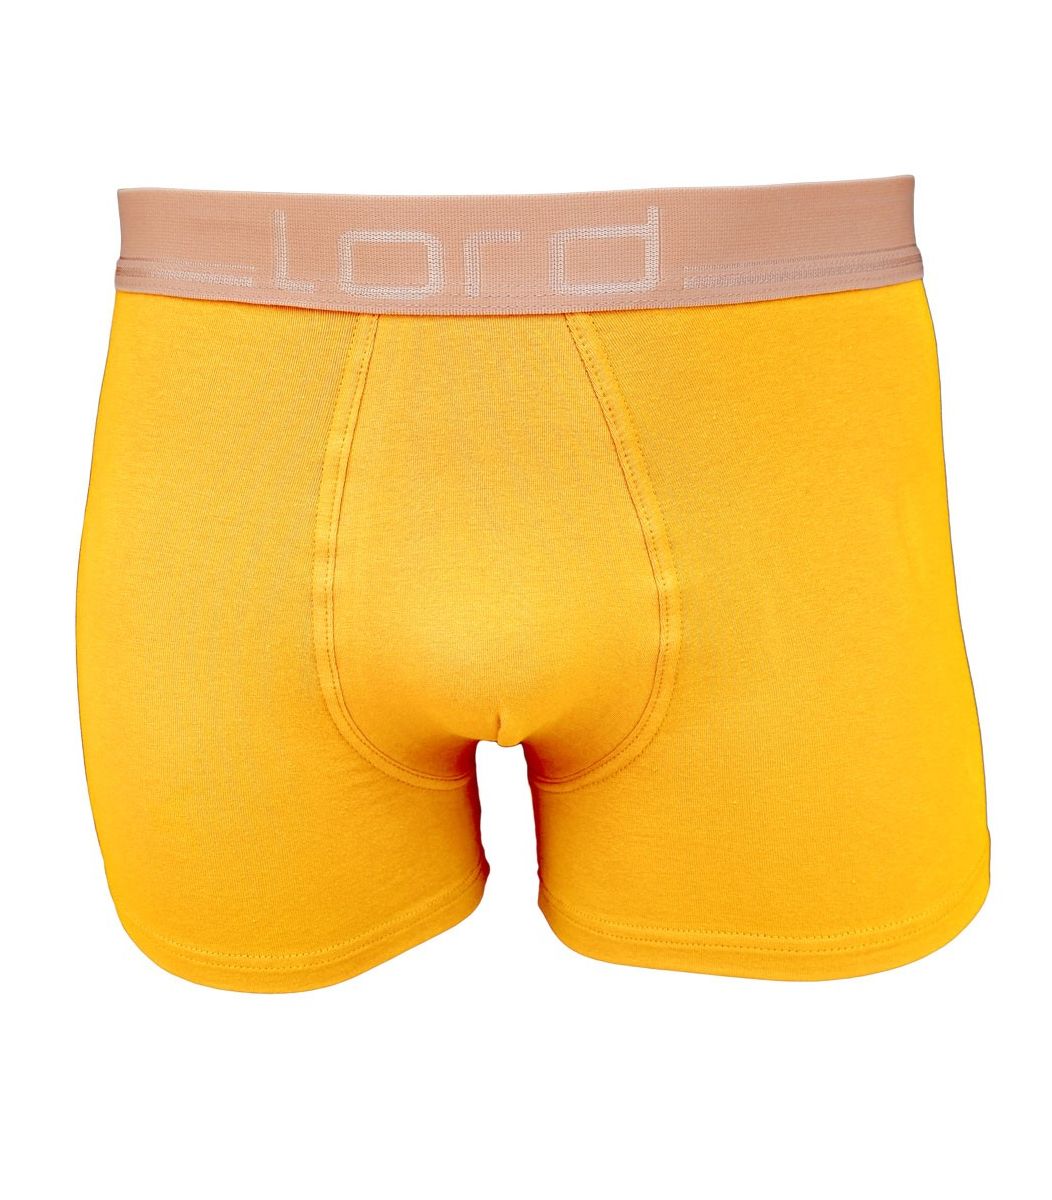  Boxers Lord Men boxer, LORD beige 8721-1